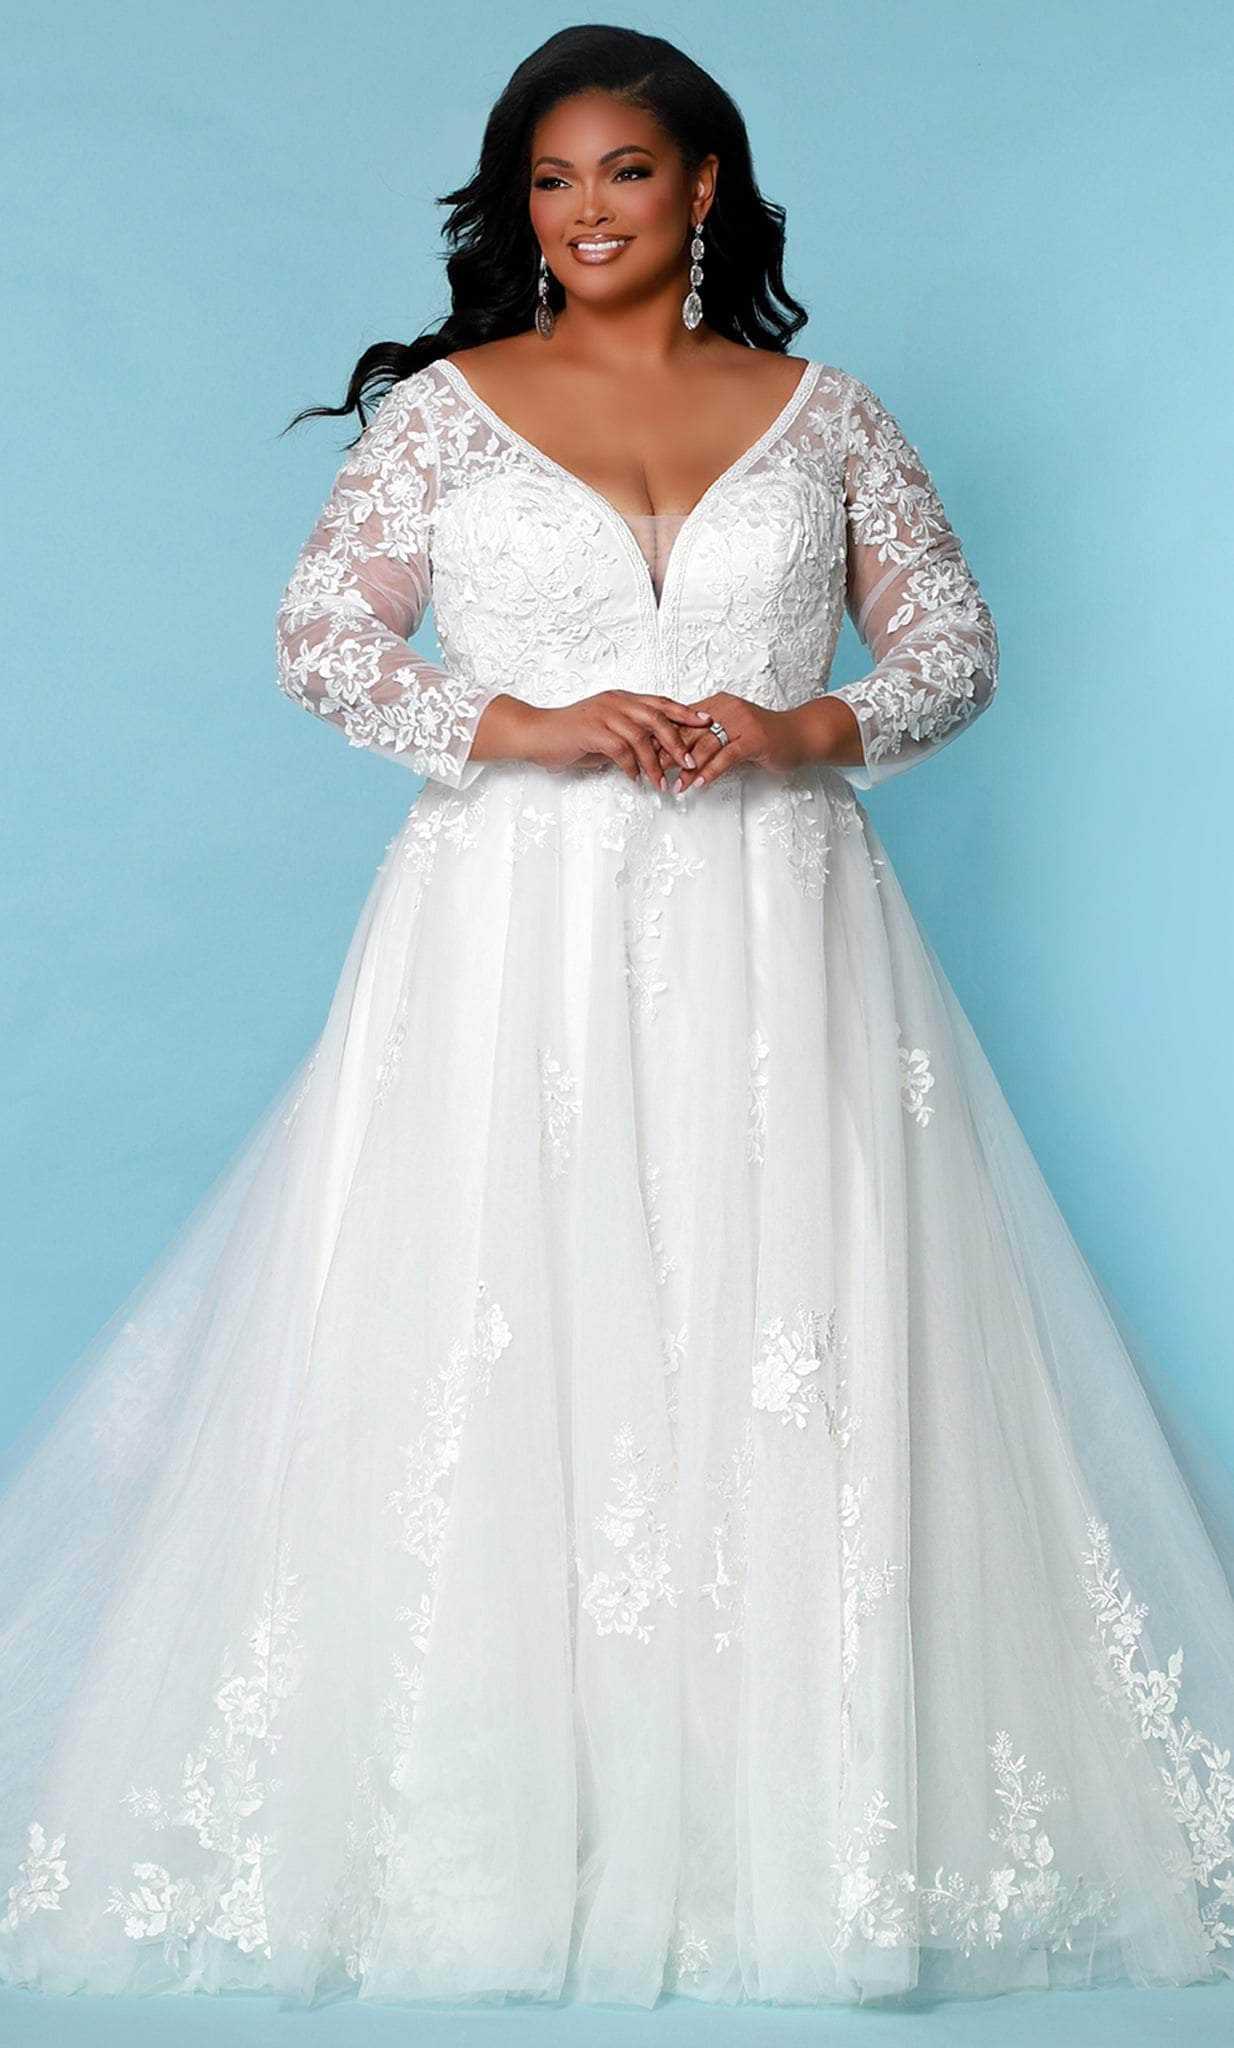 Sydney's Closet Bridal, Sydney's Closet Bridal SC5275 - Long Sleeve A-line Tulle Gown